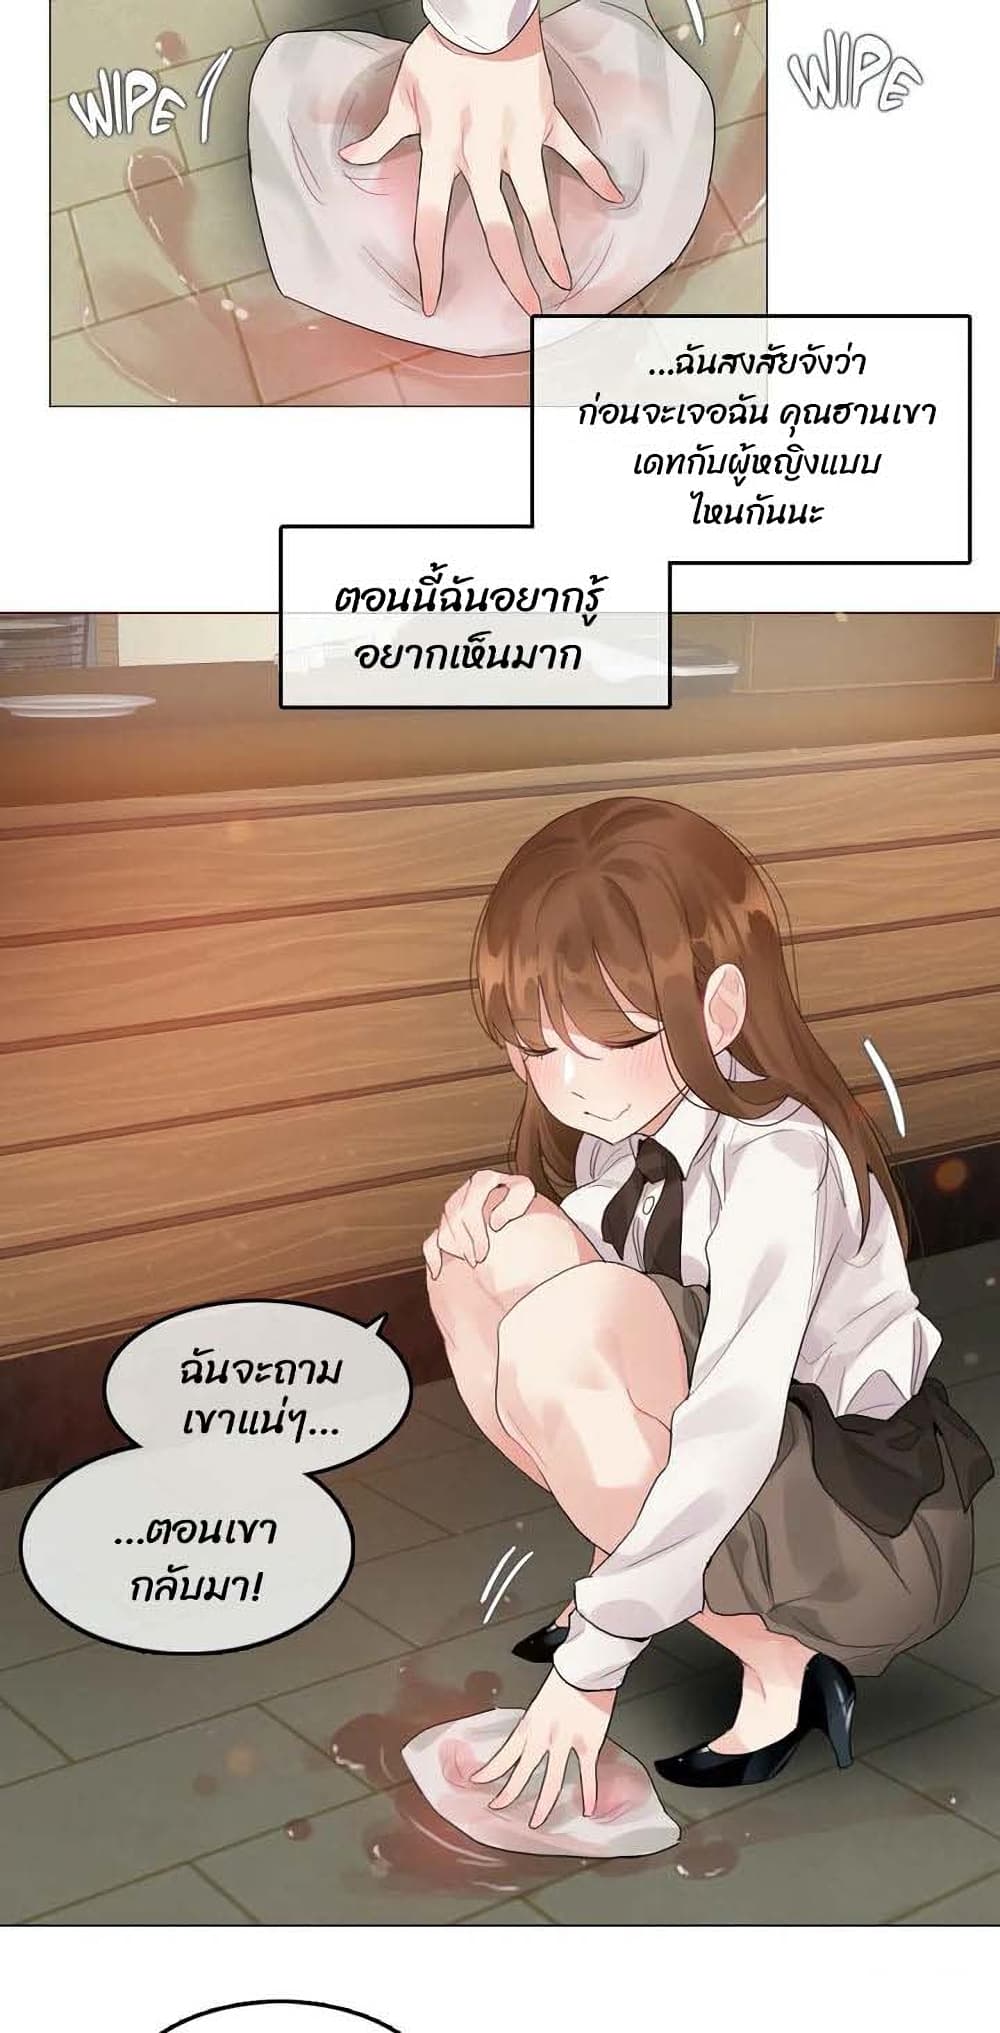 A Pervert's Daily Life 87 (20)